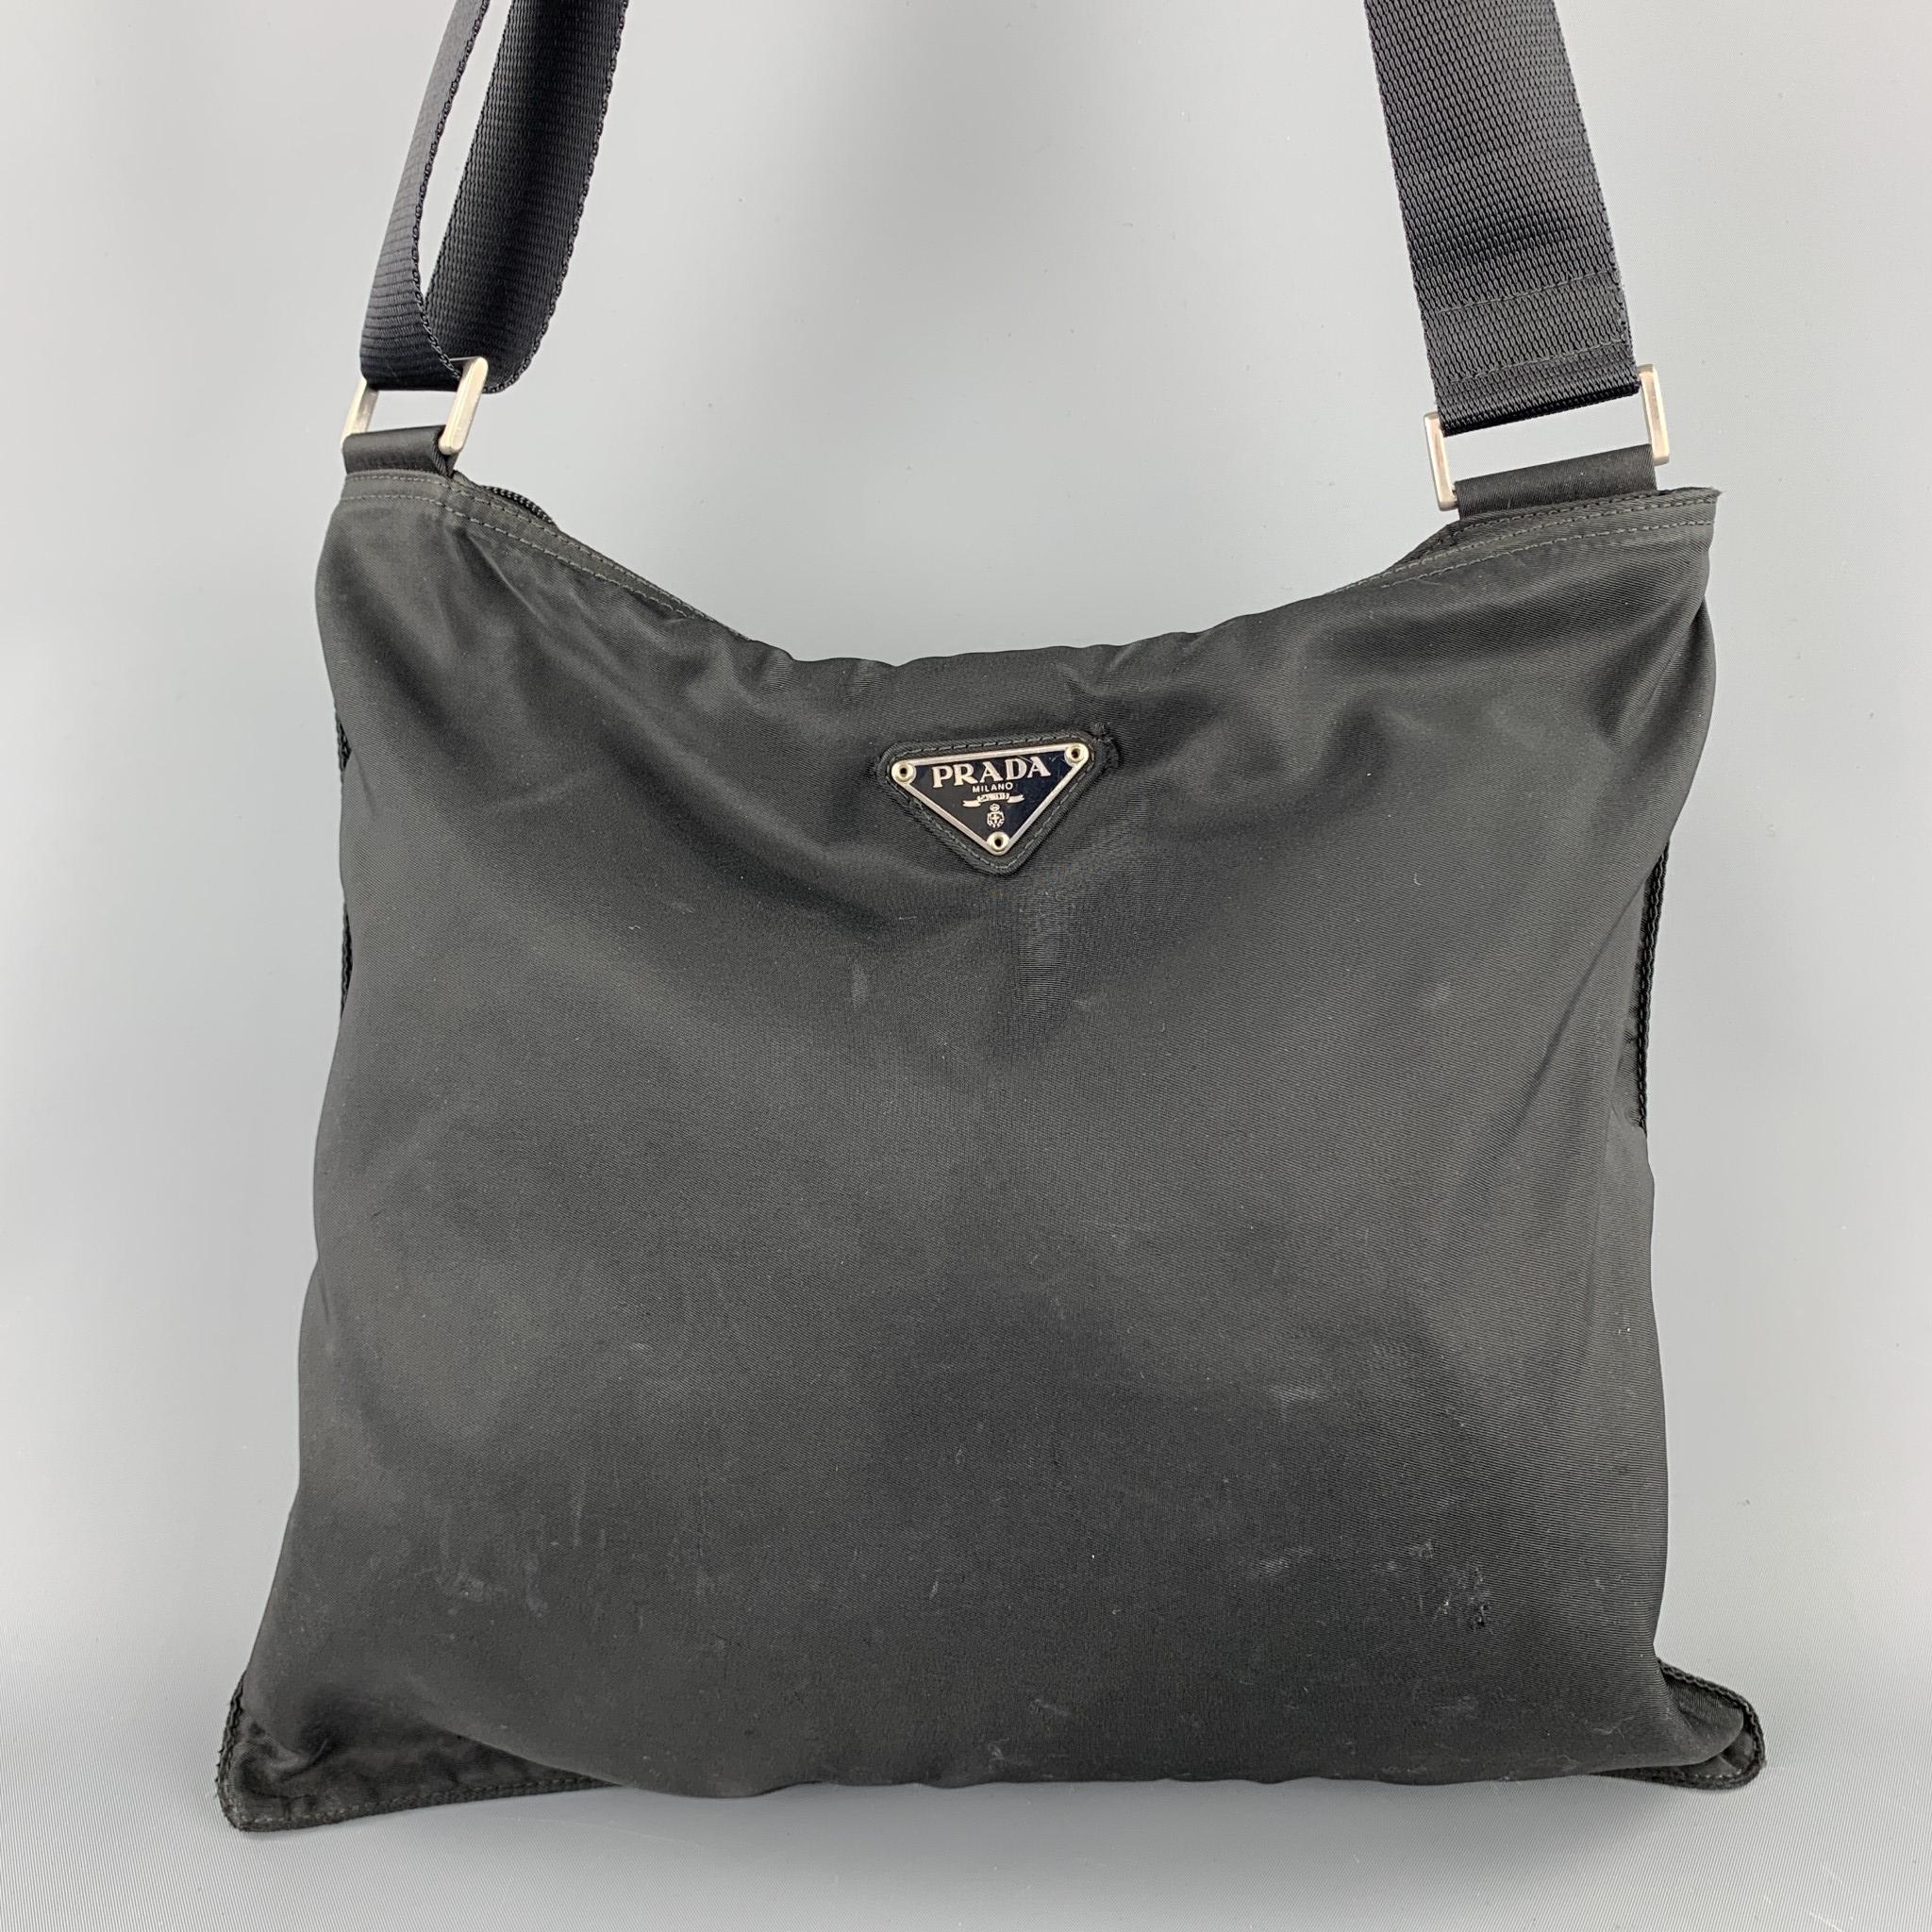 PRADA handbag comes in a black nylon featuring silver tone hardware, crossbody strap, and a zip up closure. Wear throughout. As-Is. Made in Italy.

Fair Pre-Owned Condition.
Marked: 25

Measurements:

Length: 12 in.
Width: 2 in. 
Height: 11.5